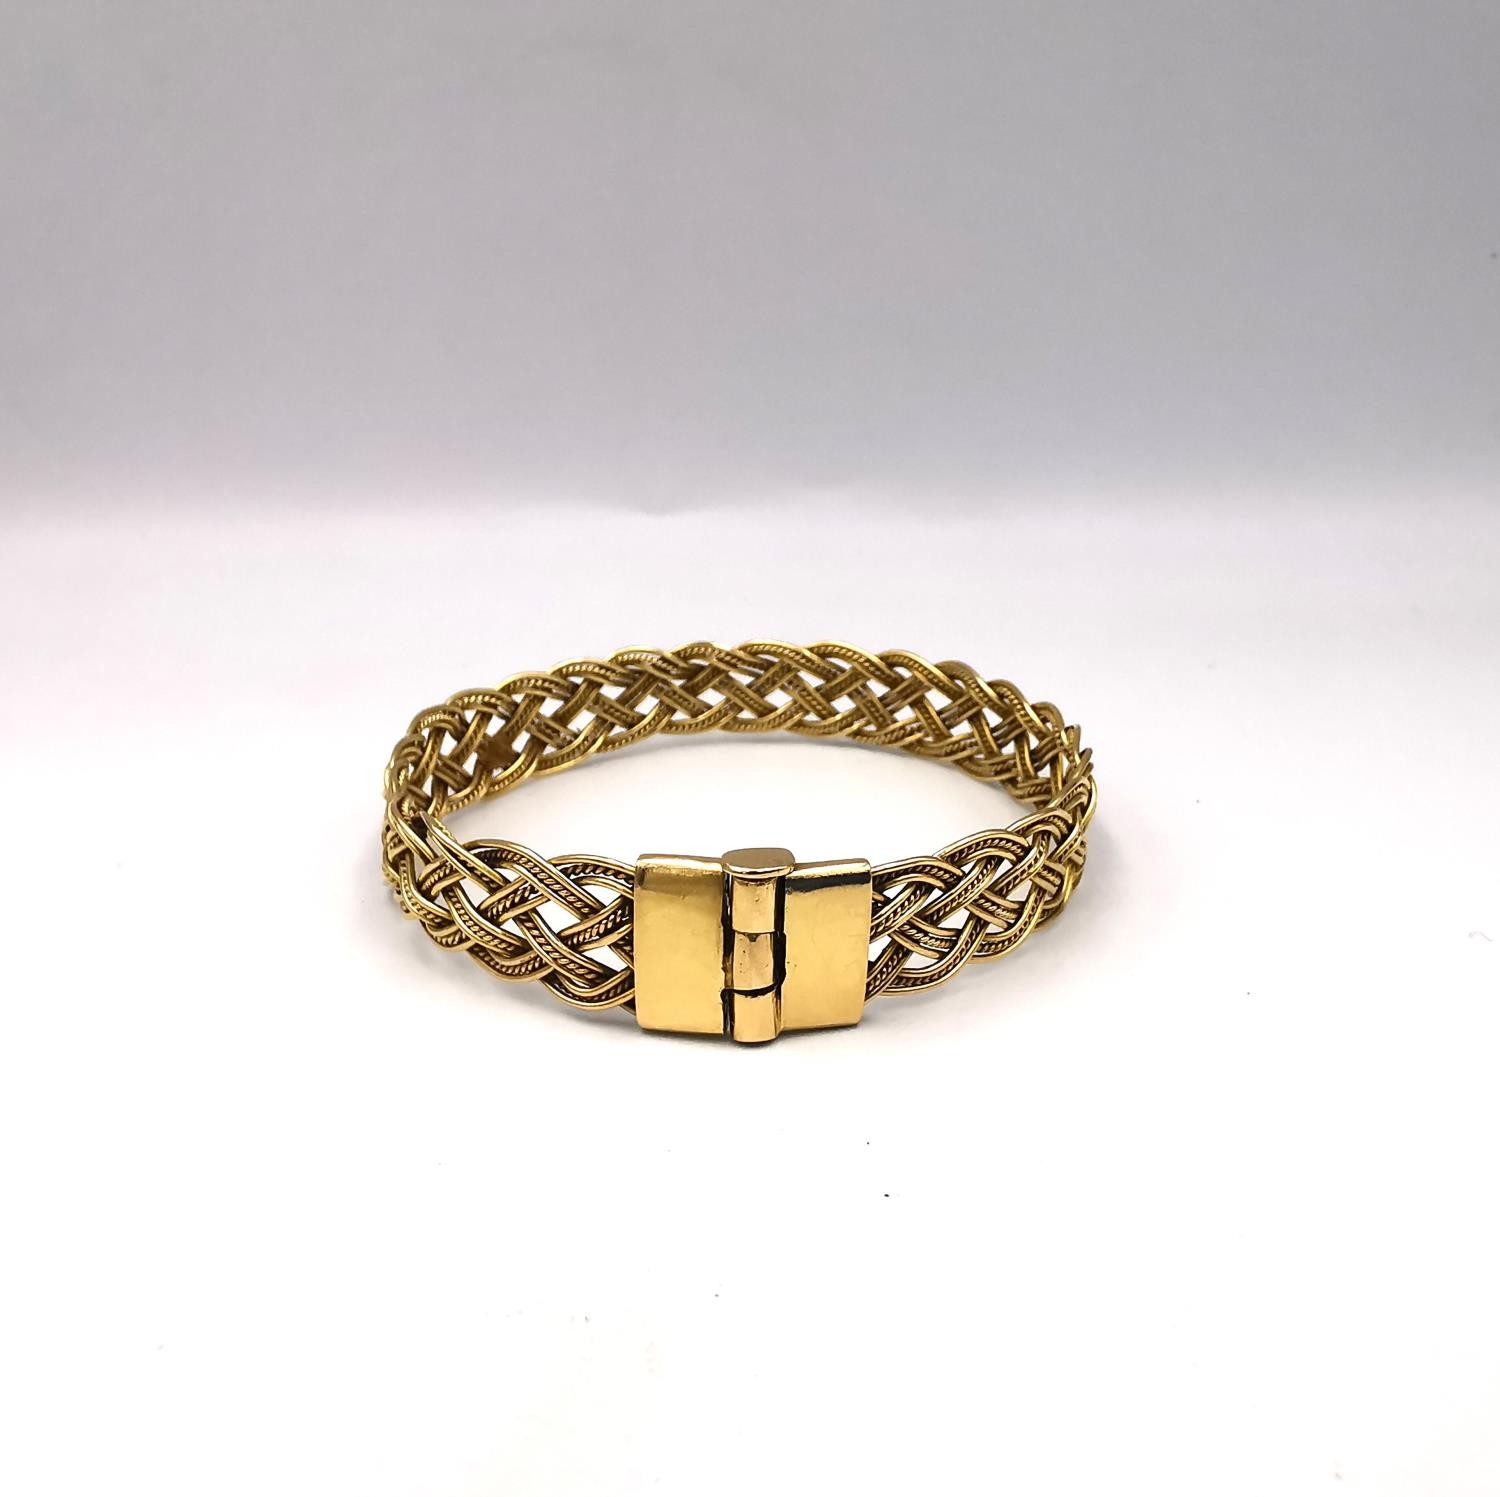 A woven gold plated wirework plaited bracelet with pin fastening. Diameter 6cm. Weight 18.62g.